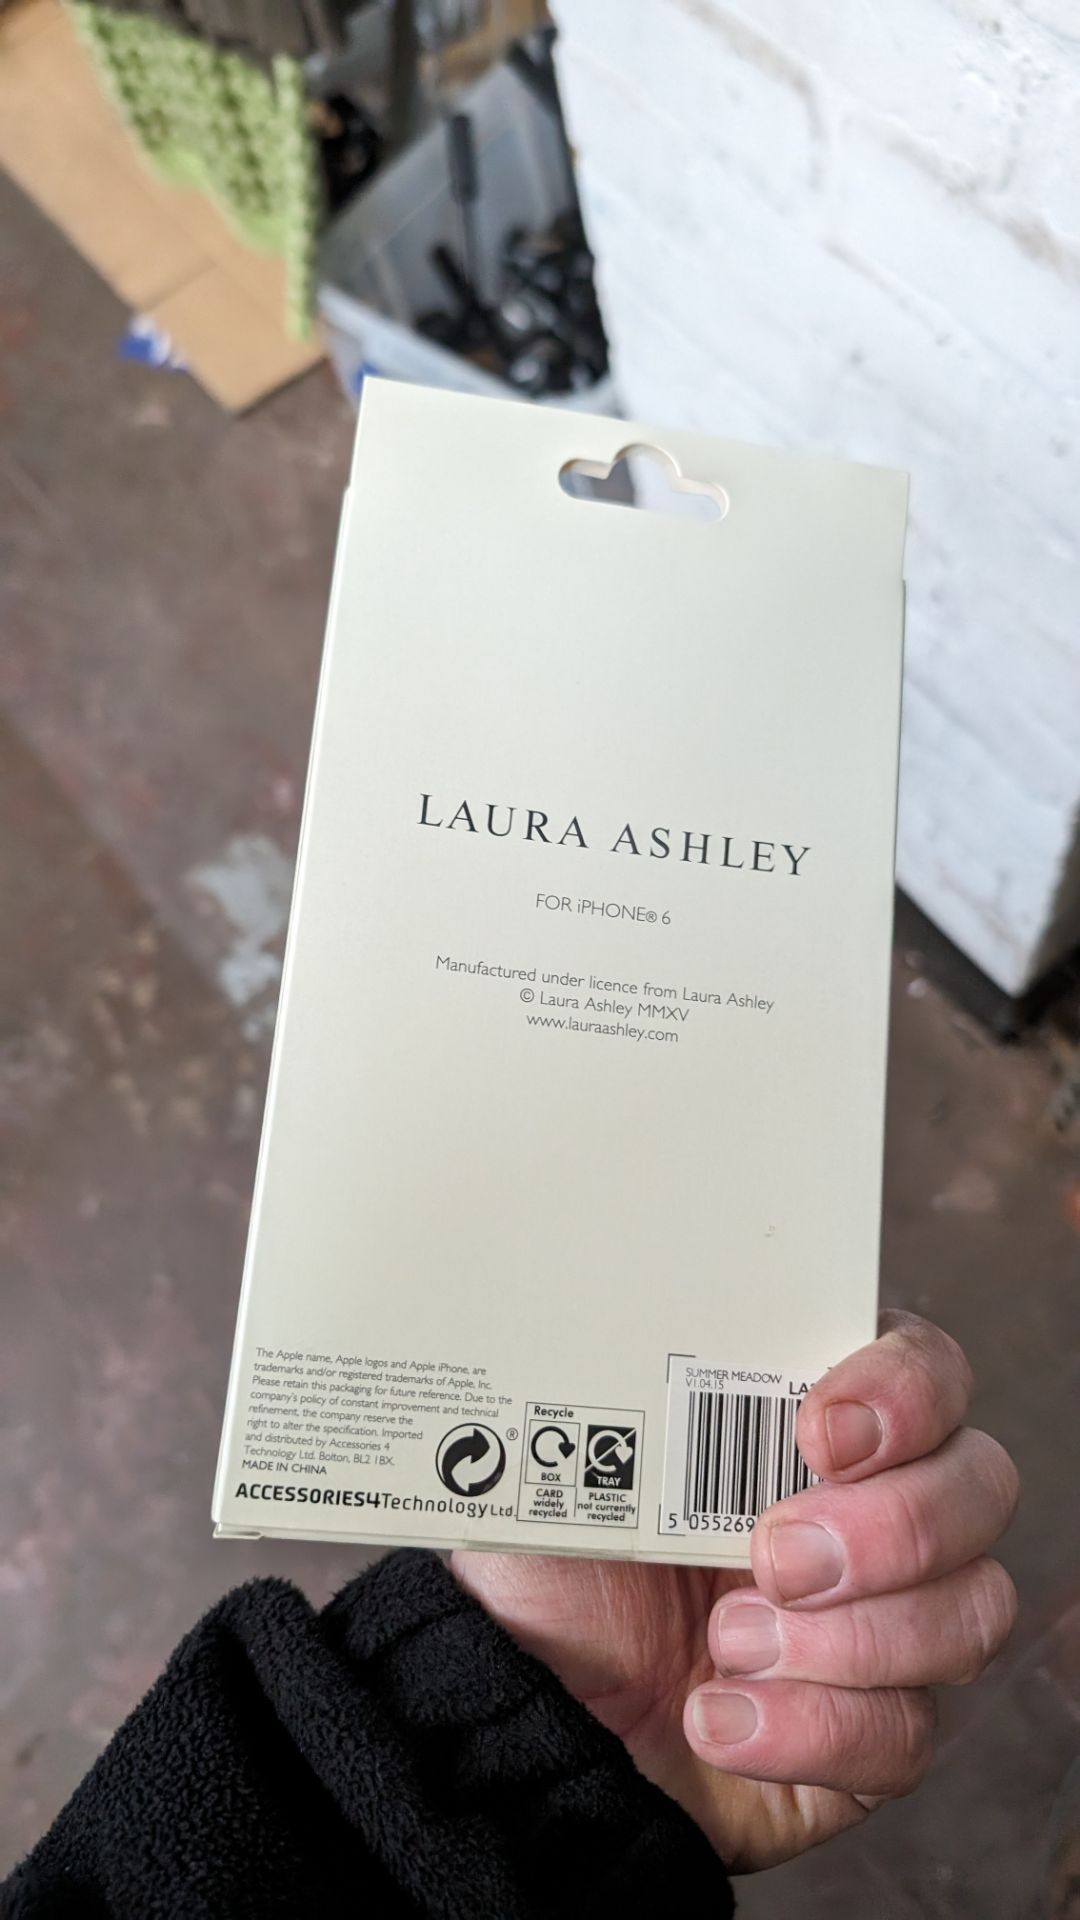 Large quantity of Laura Ashley iPhone covers/cases for iPhone 6 in several different designs - 10 la - Image 4 of 4